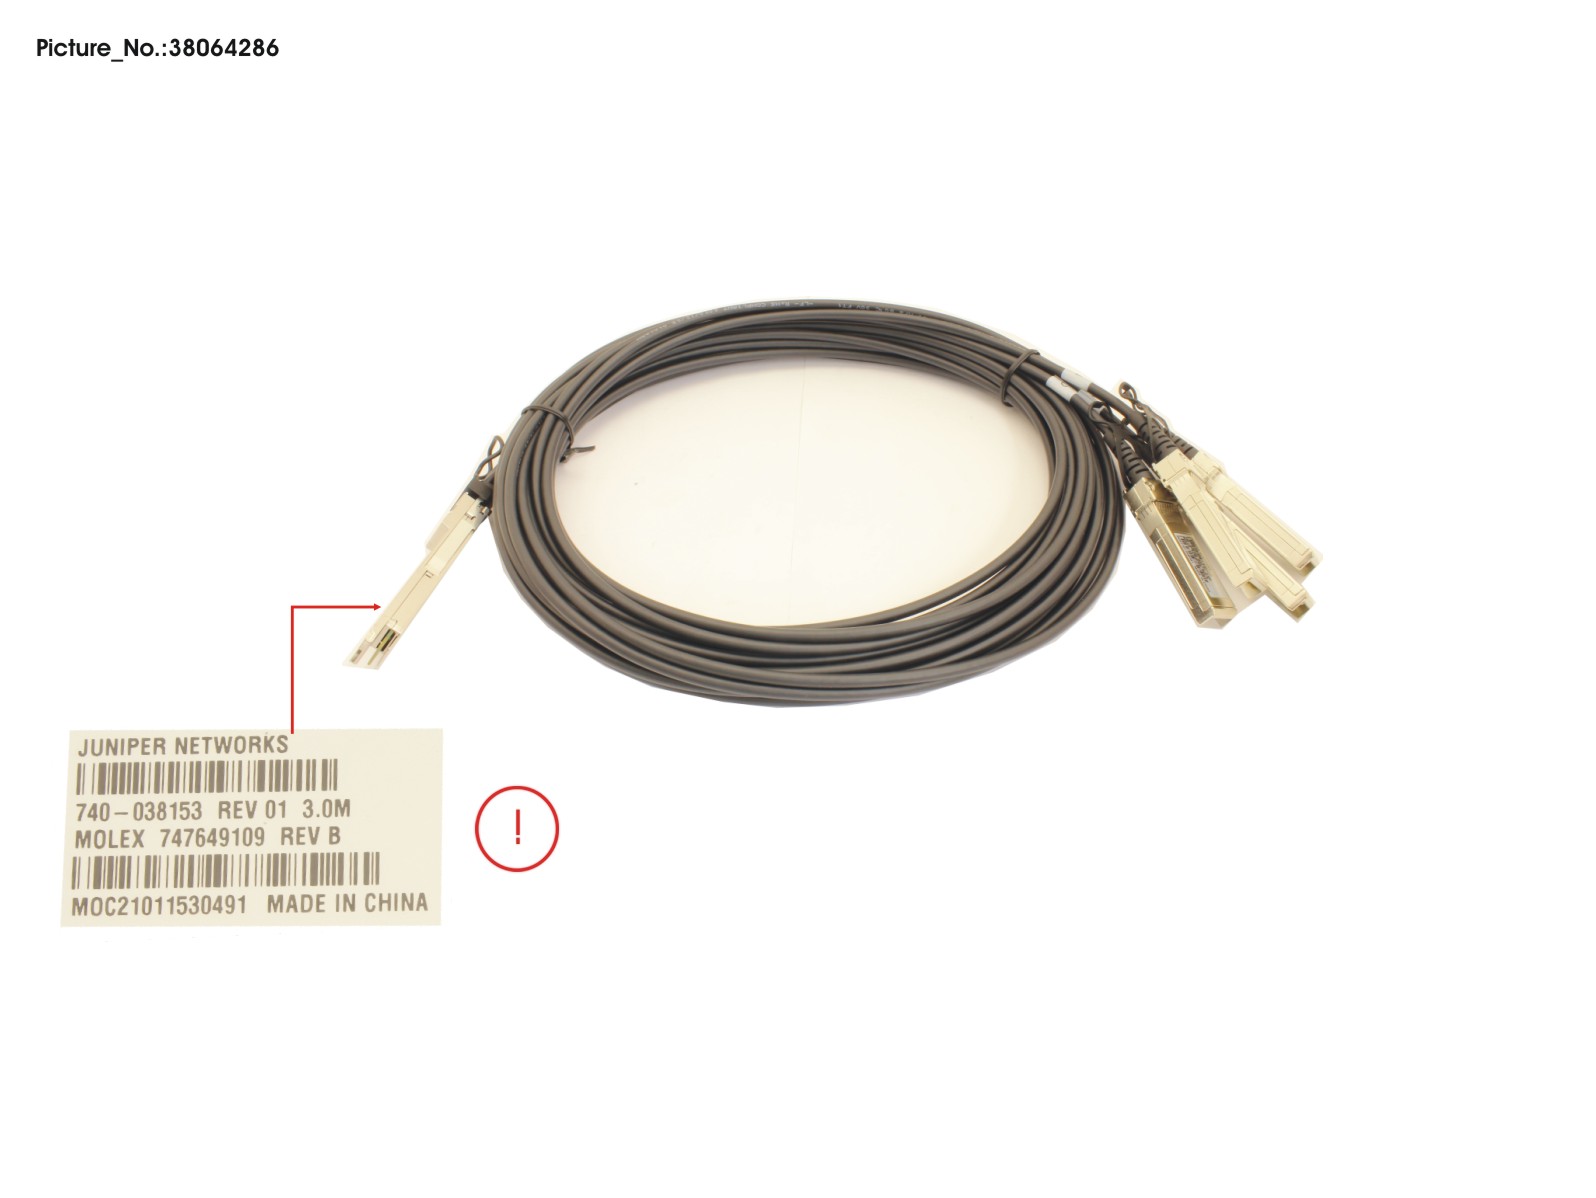 40G DIRECT ATTACHED CABLE(BREAKOUT, 3M,